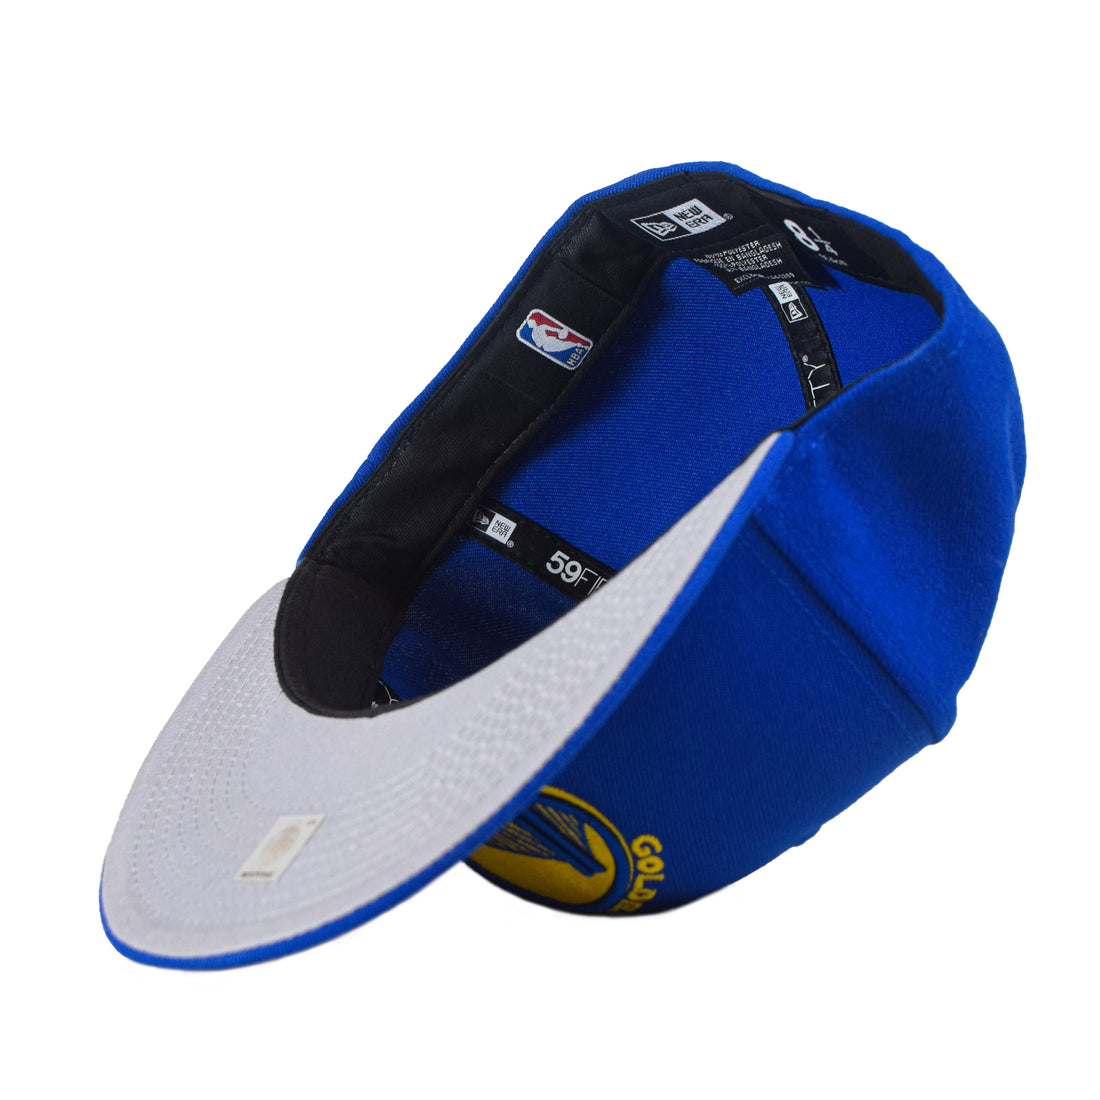 New Era Golden State Warriors 59Fifty Fitted - Blue